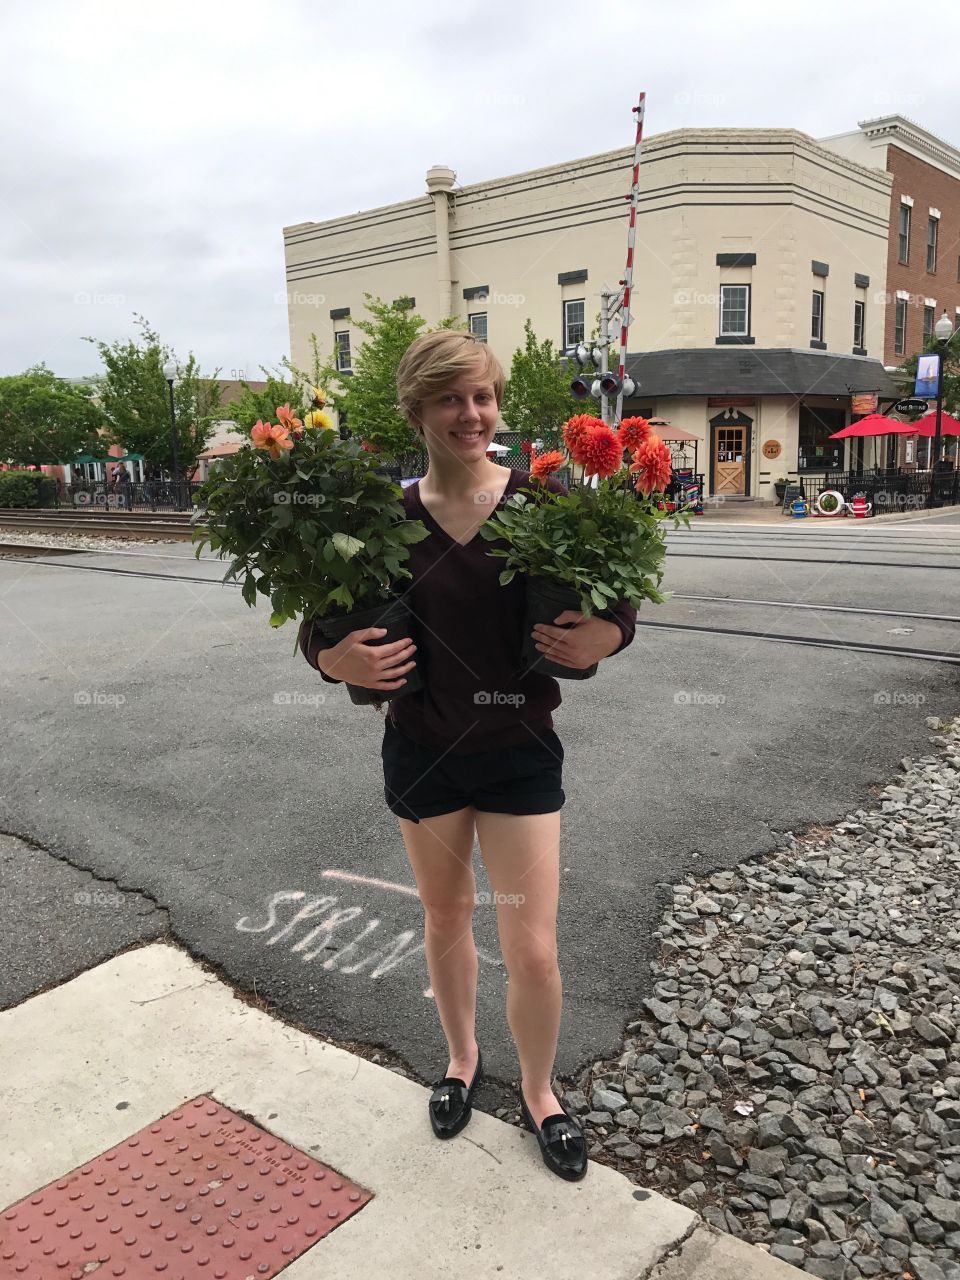 A young woman poses by the train station of Old Town Manassas, Virginia with freshly-bought Dahlias from the local farmer’s market